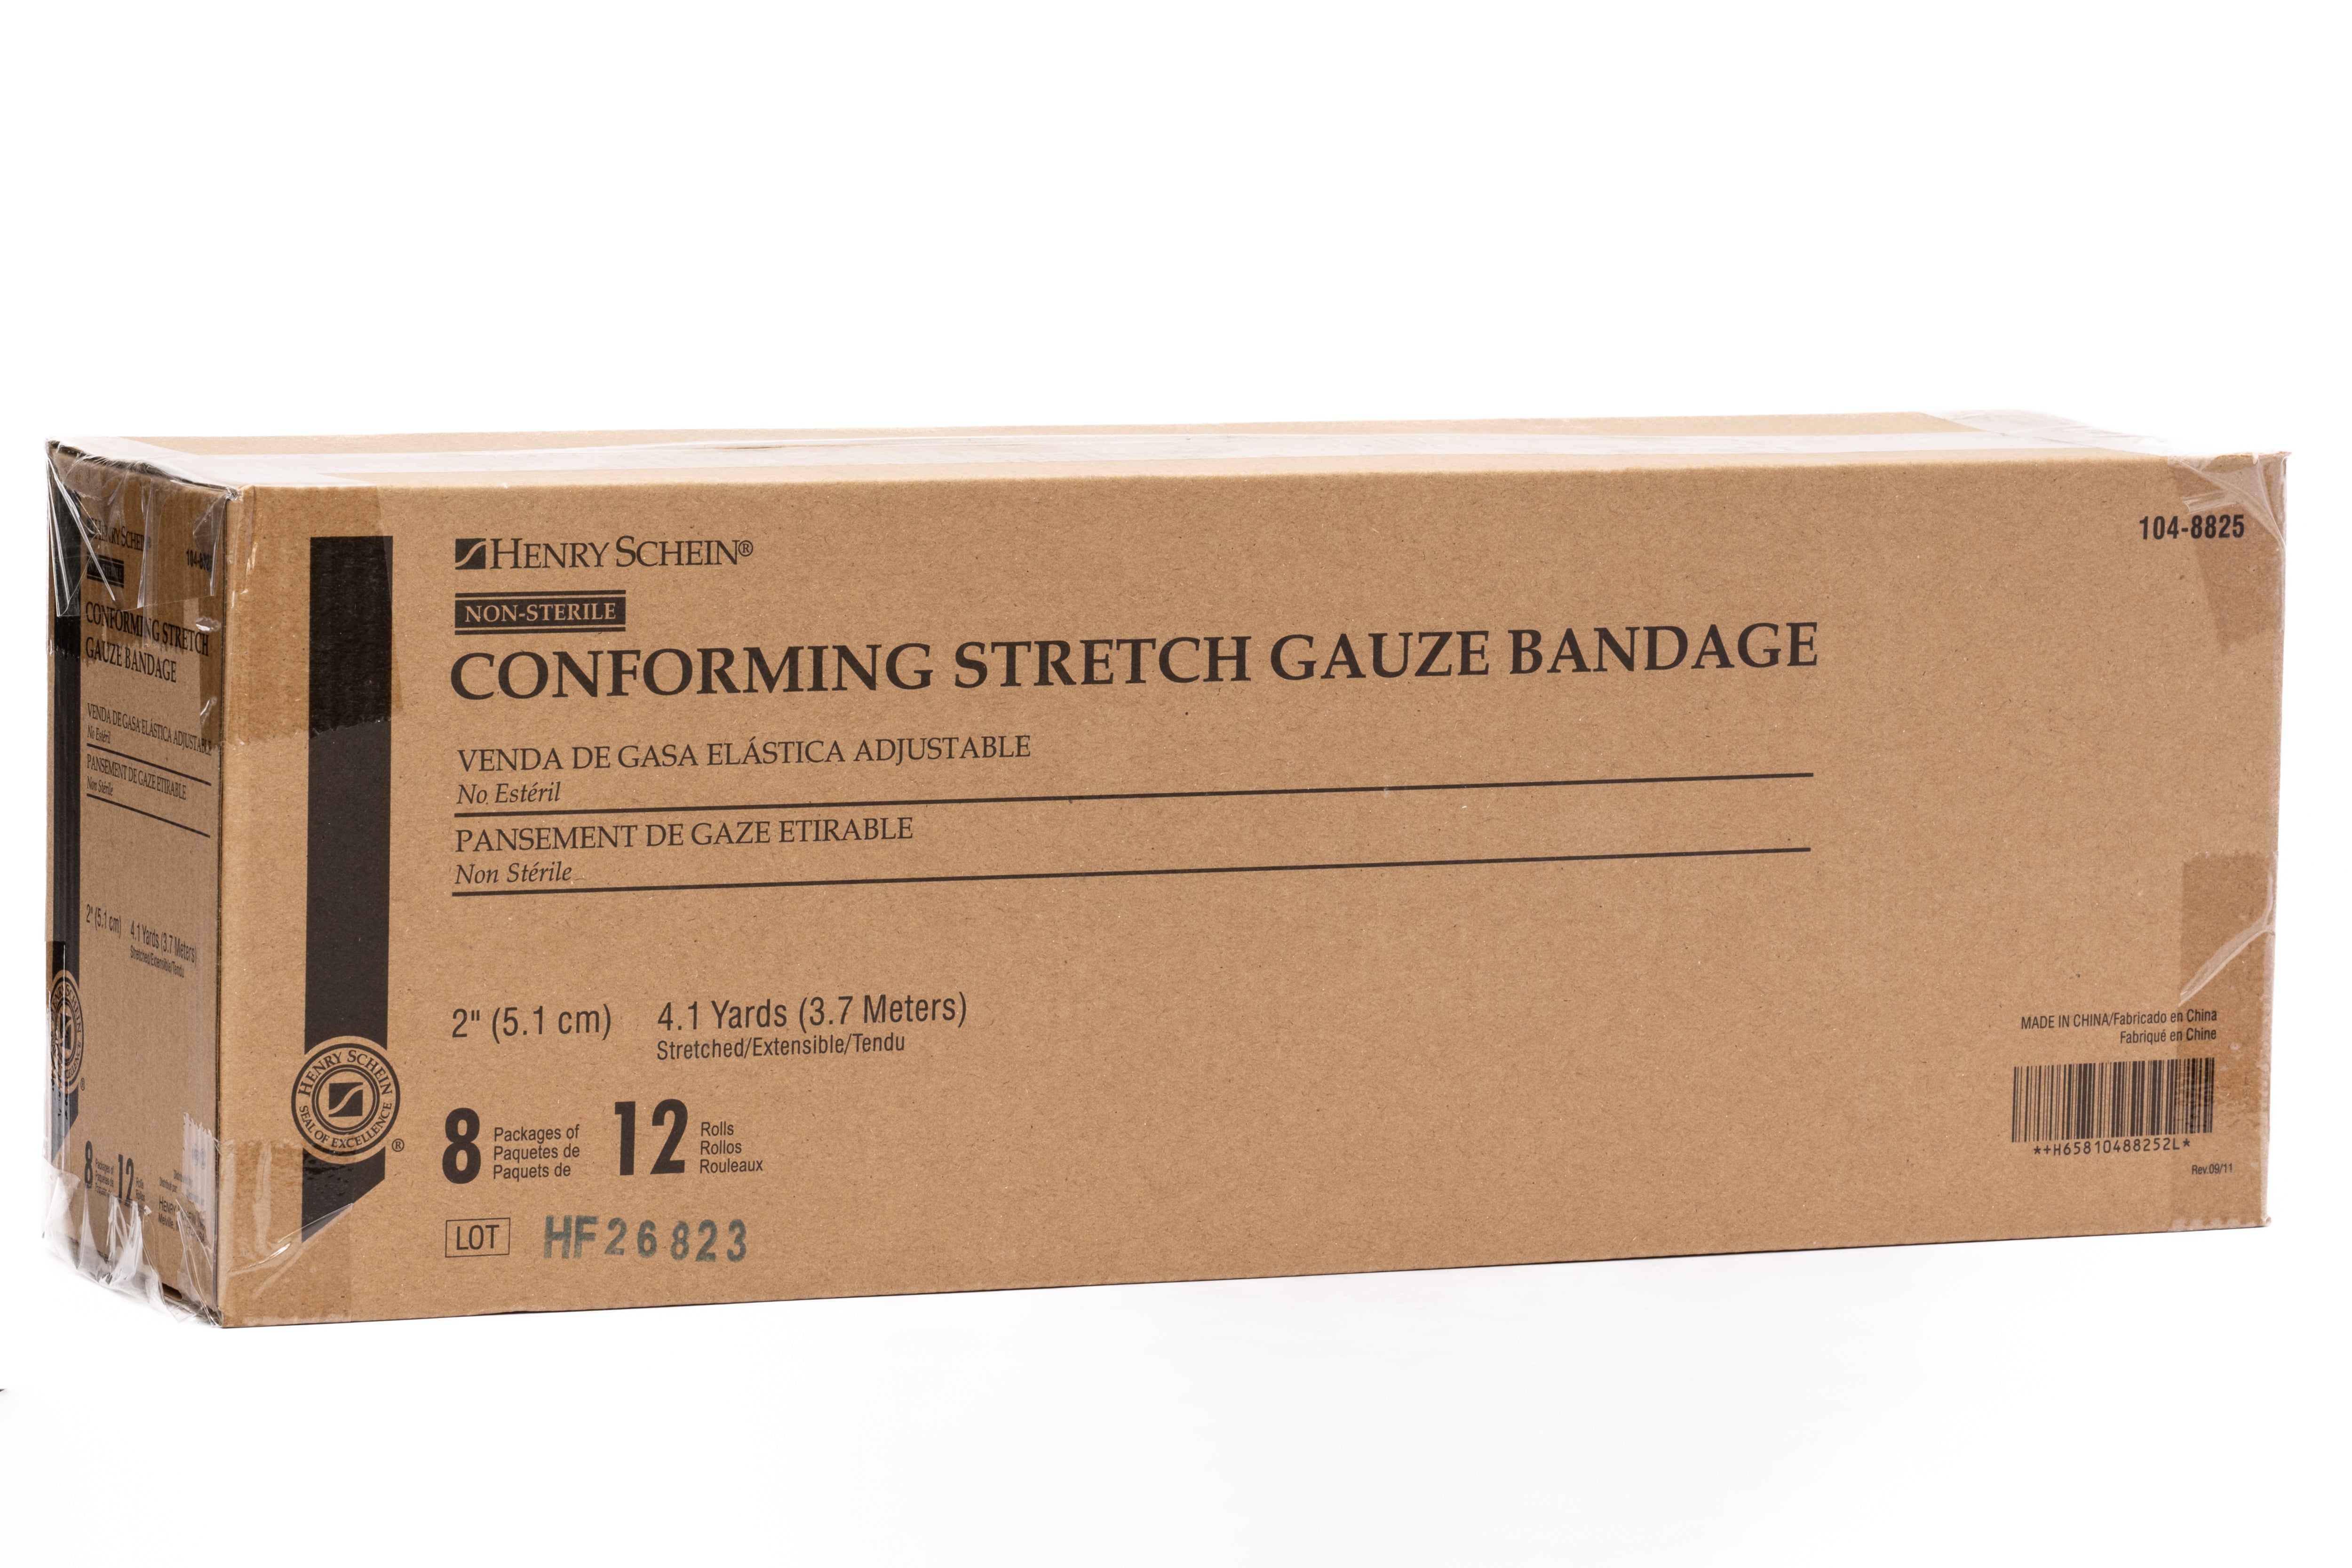 Henry Schein Conforming Stretch Gauze Bandage, 3" x 4.1 yards, Pack of 12, 8 ply, Non-Sterile